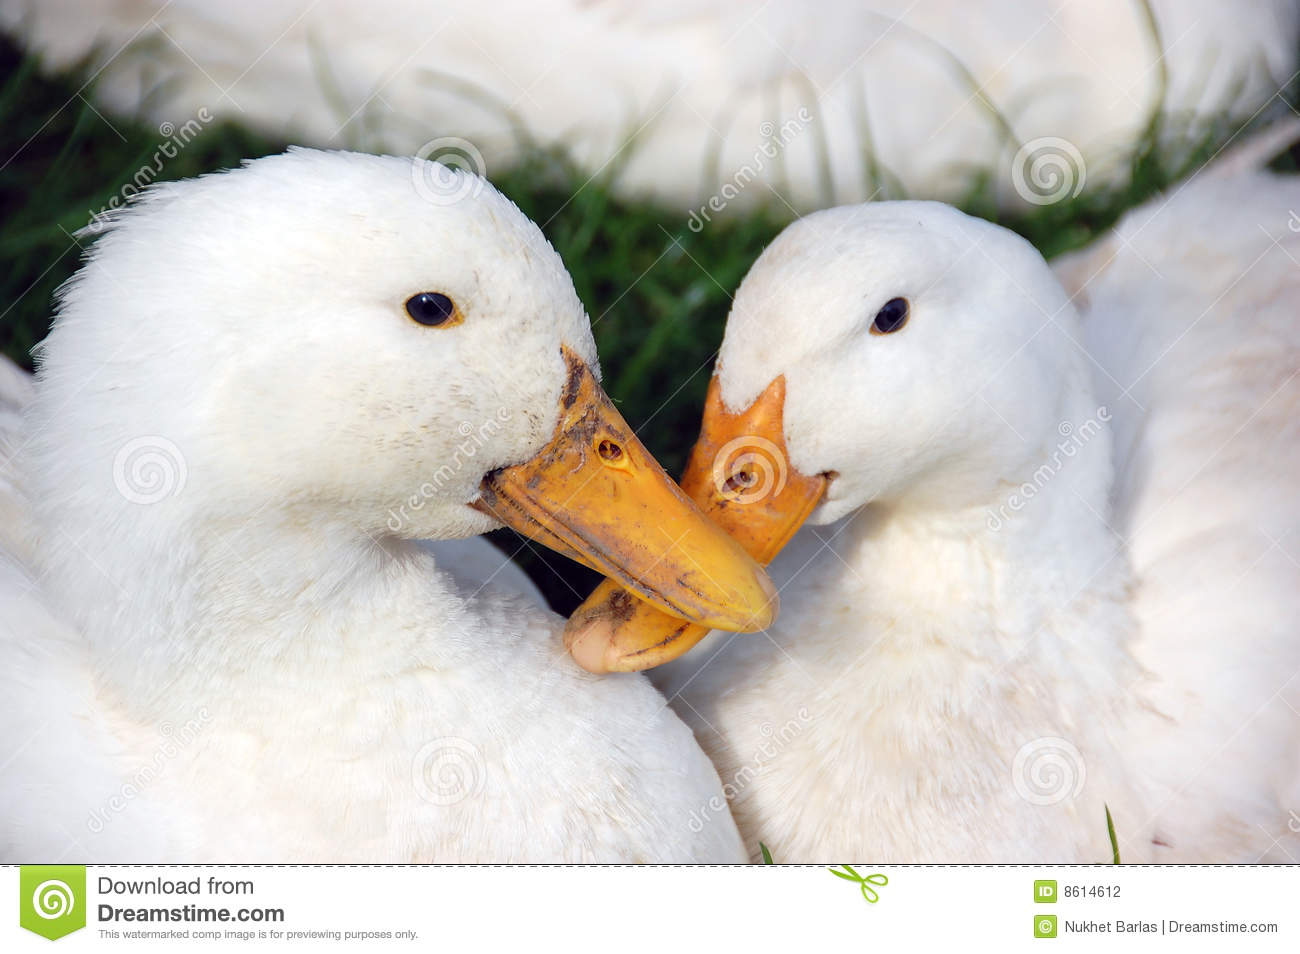 Two White Ducks With White Fluffy Feathers Dark Eyes And Orange    